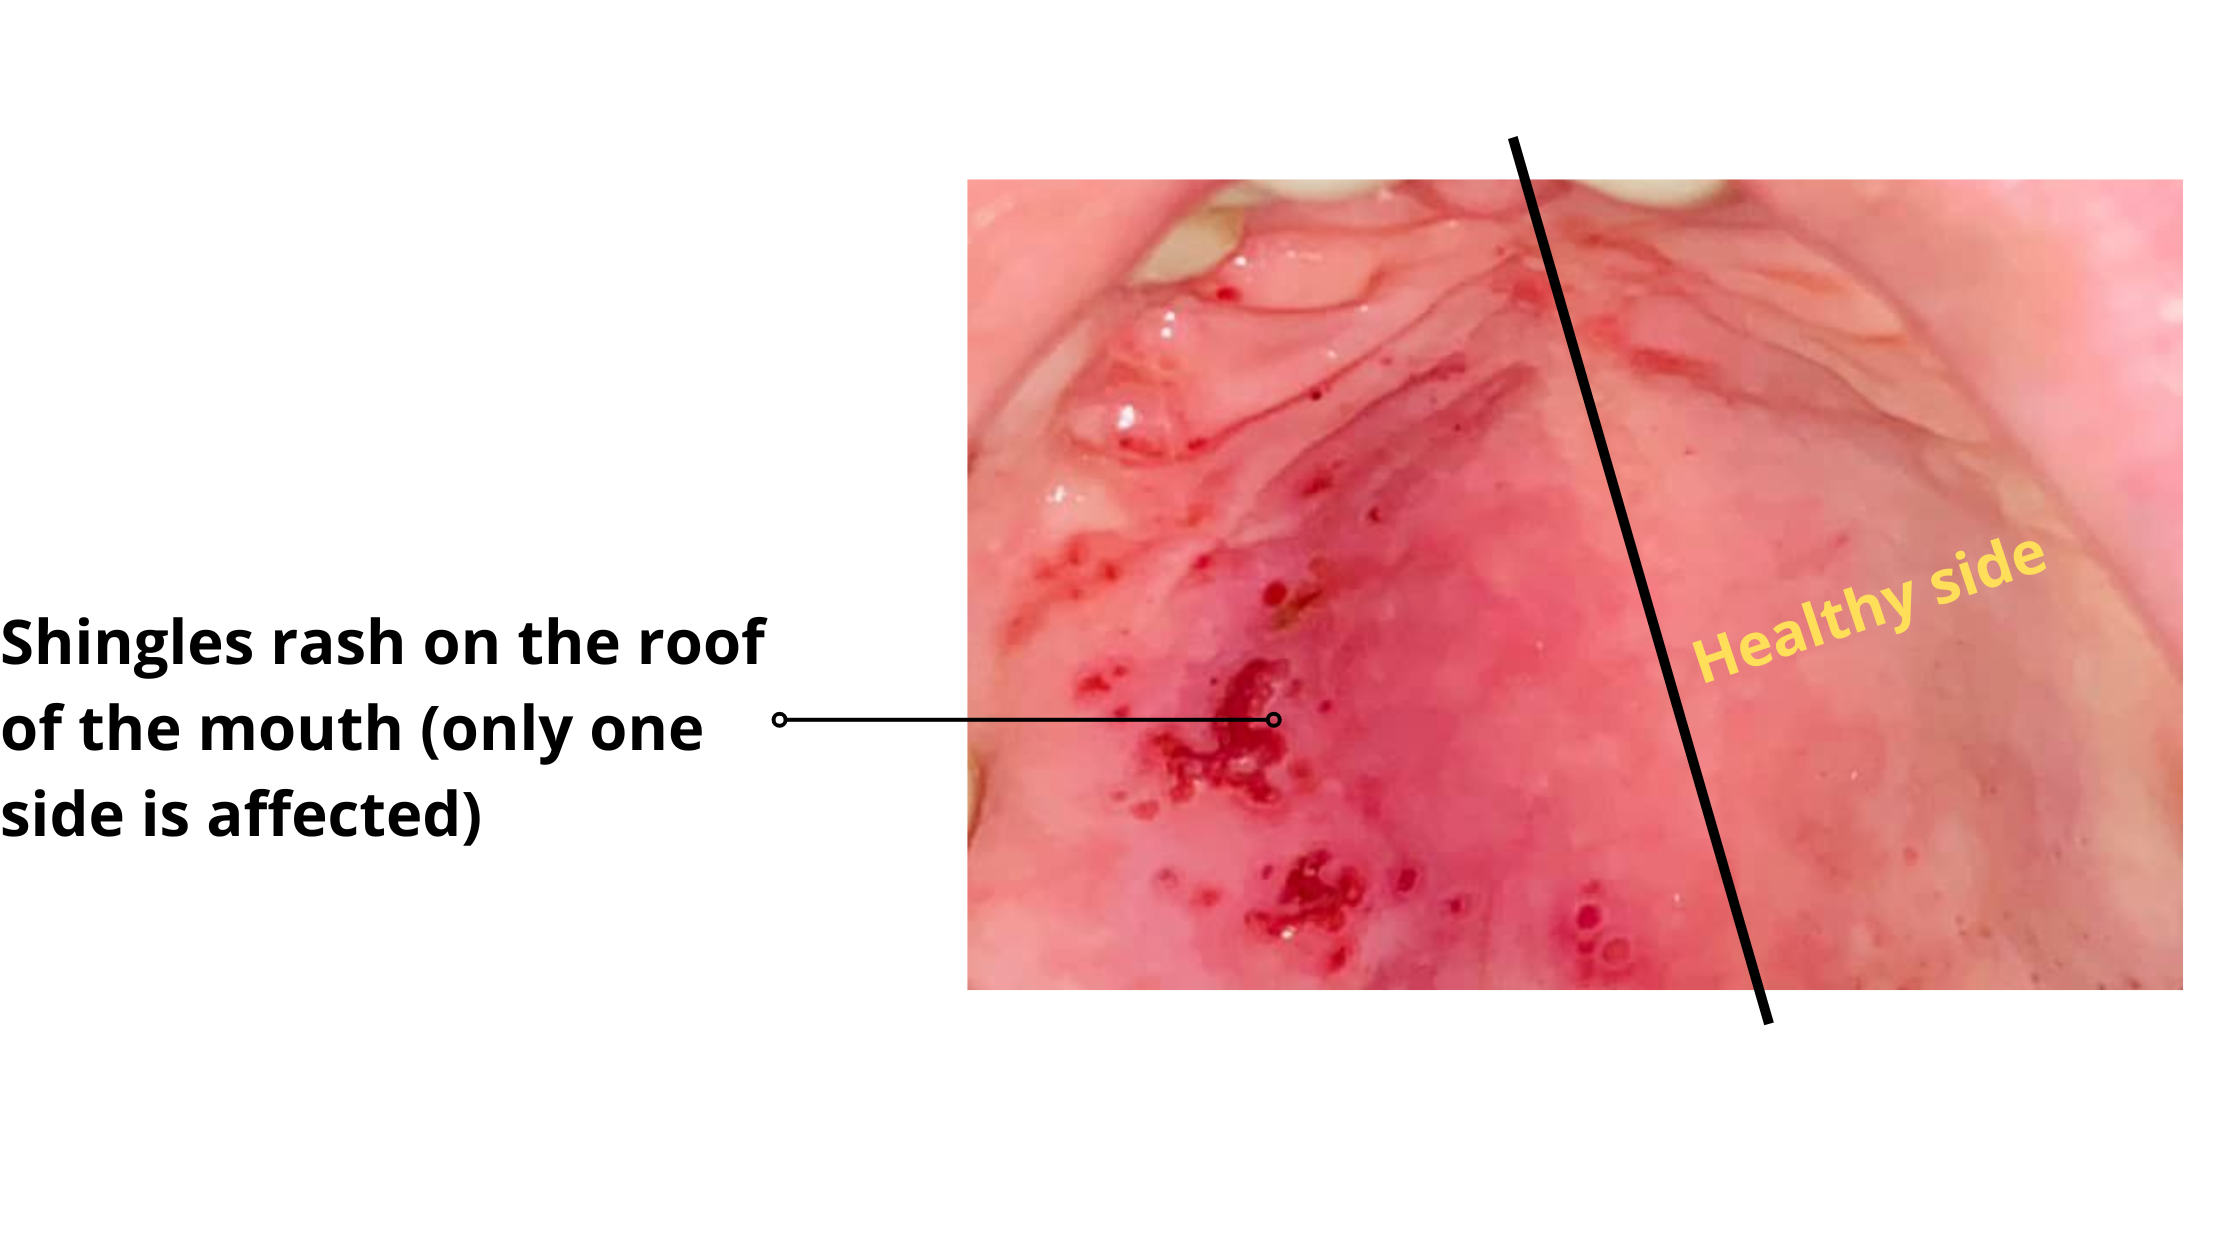 Shingles rash on roof of the mouth (recurrent varicella-zoster virus infection)